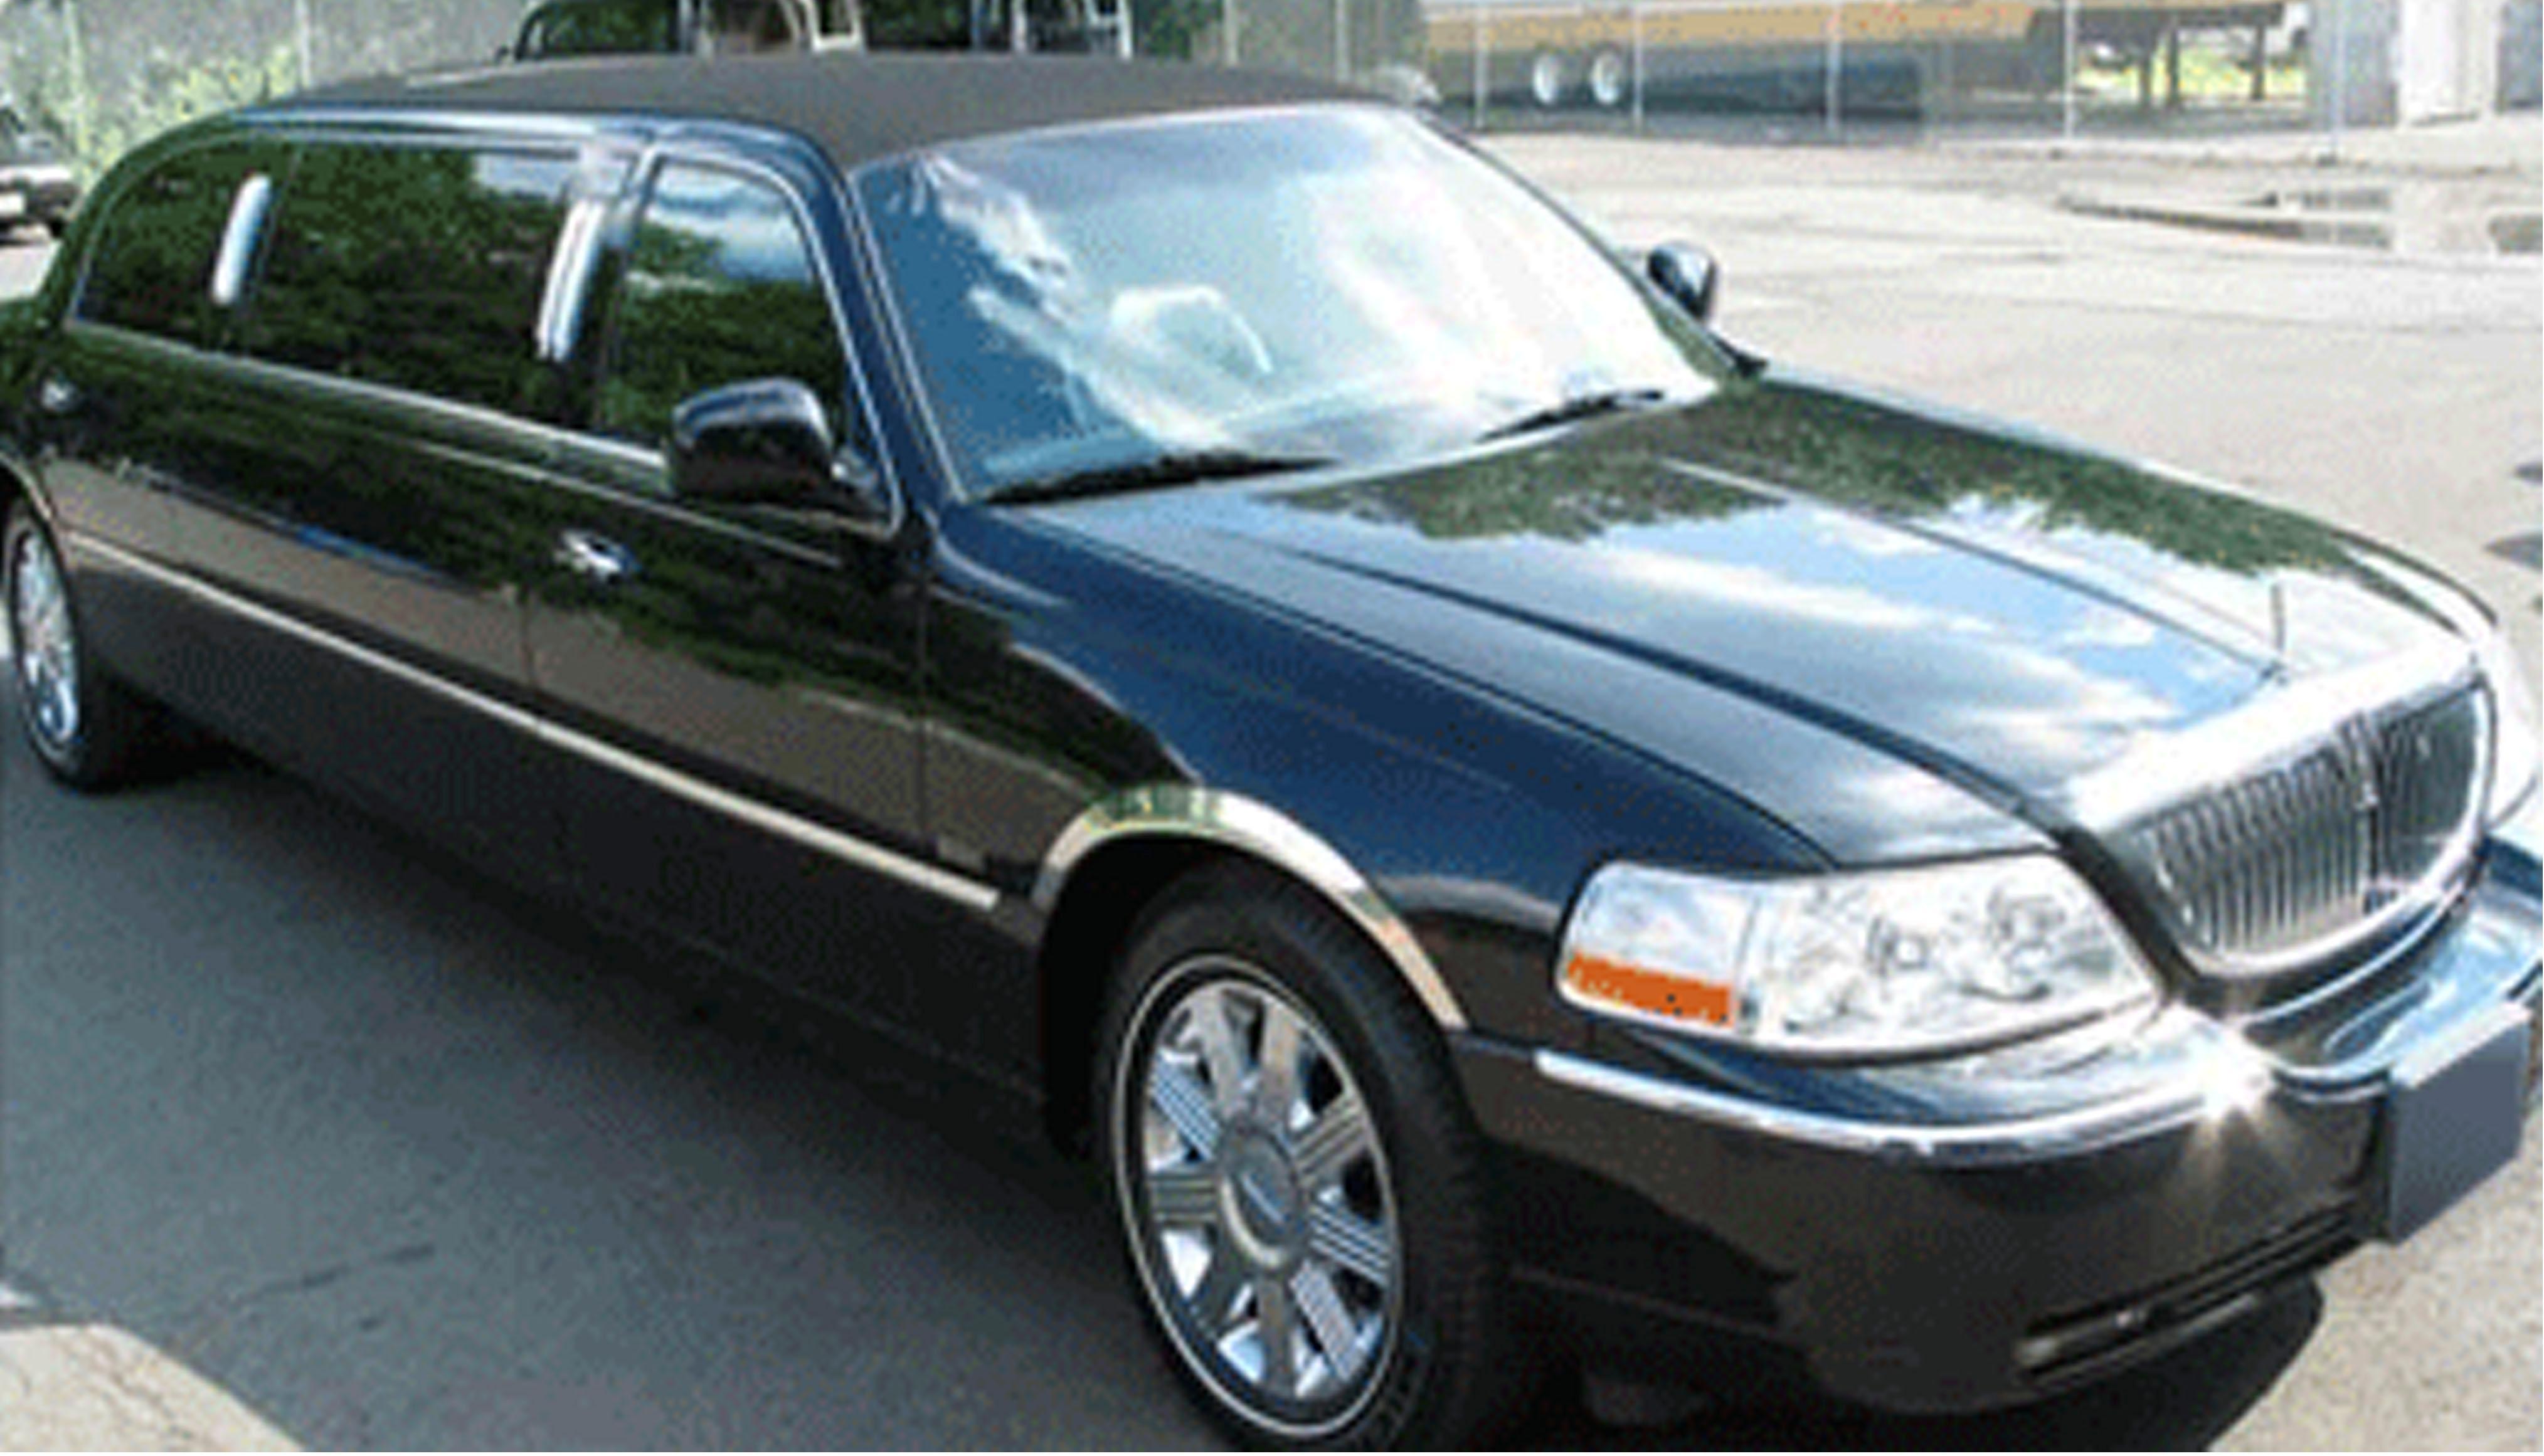 Elegant, timeless, and traditional. Our personal limoï¿½s custom features include: 8? extended rear doors for easy entry (donï¿½t worry brides, your dress will fit)